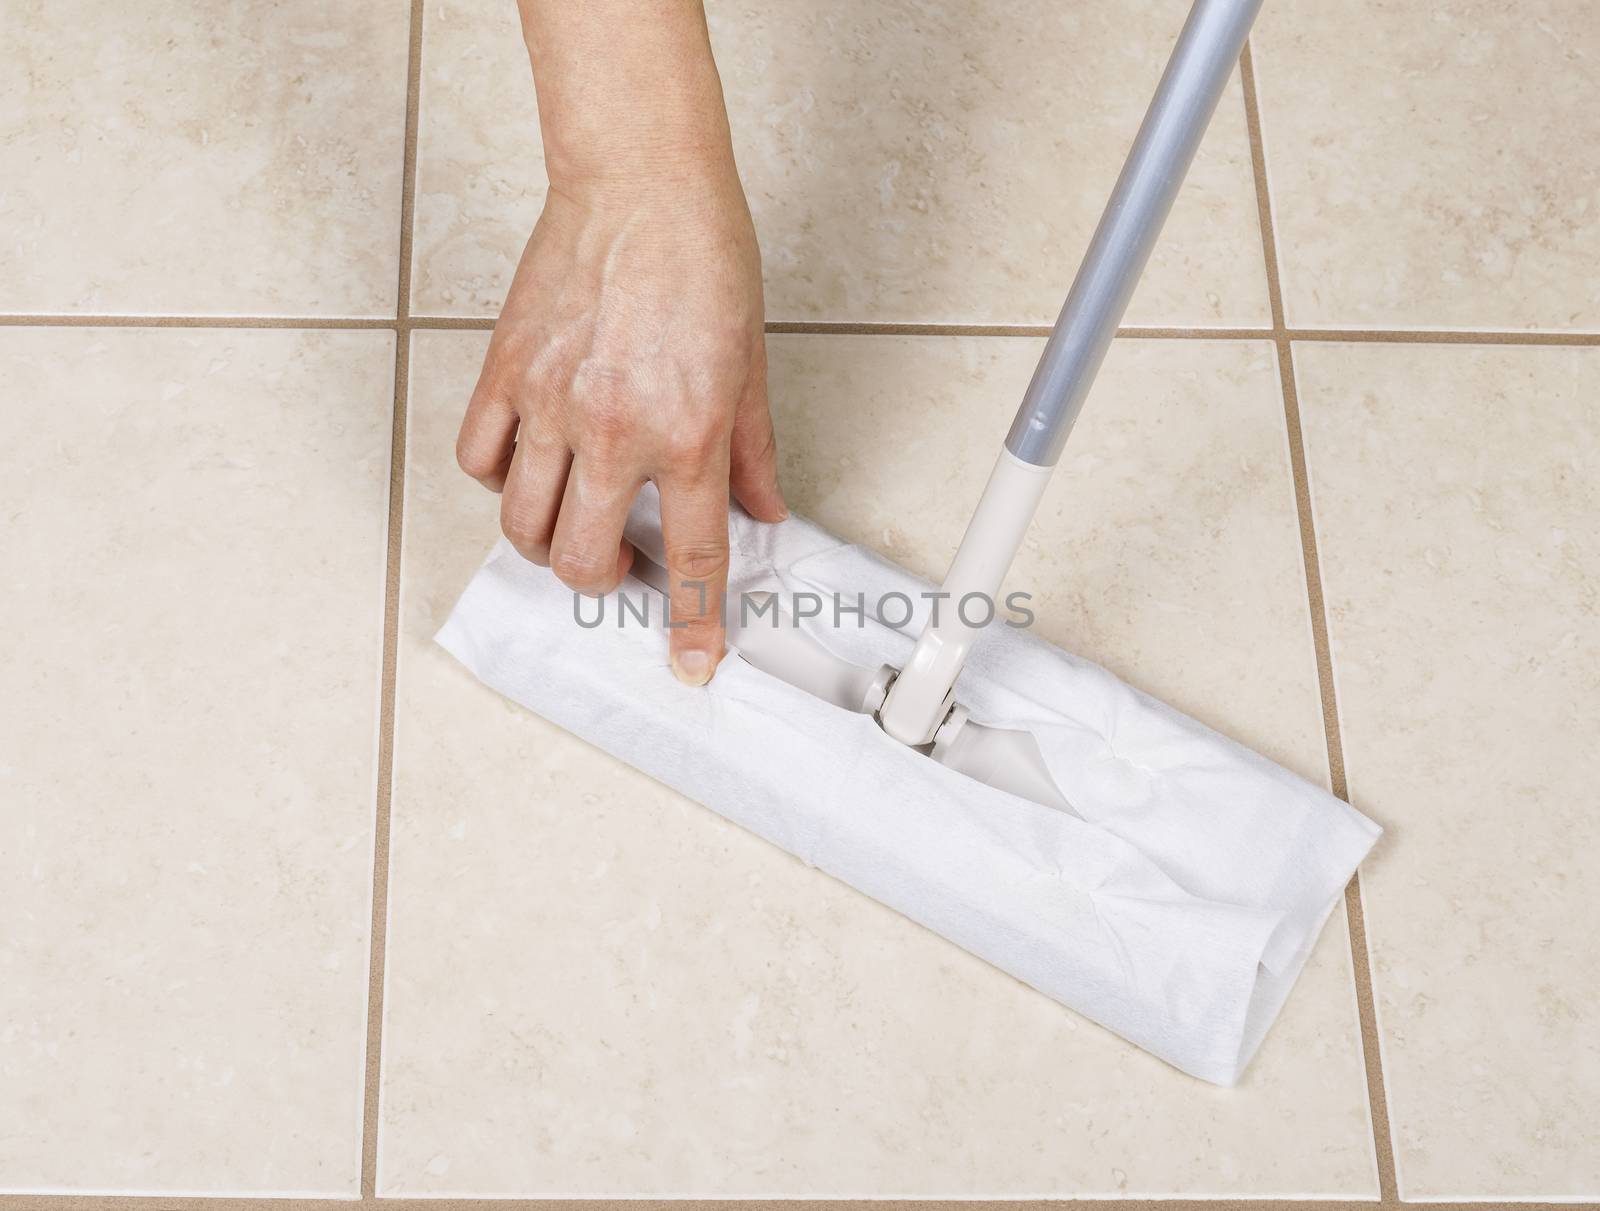 Hand placing paper wiper on cleaning broom for bathroom tile sweep 